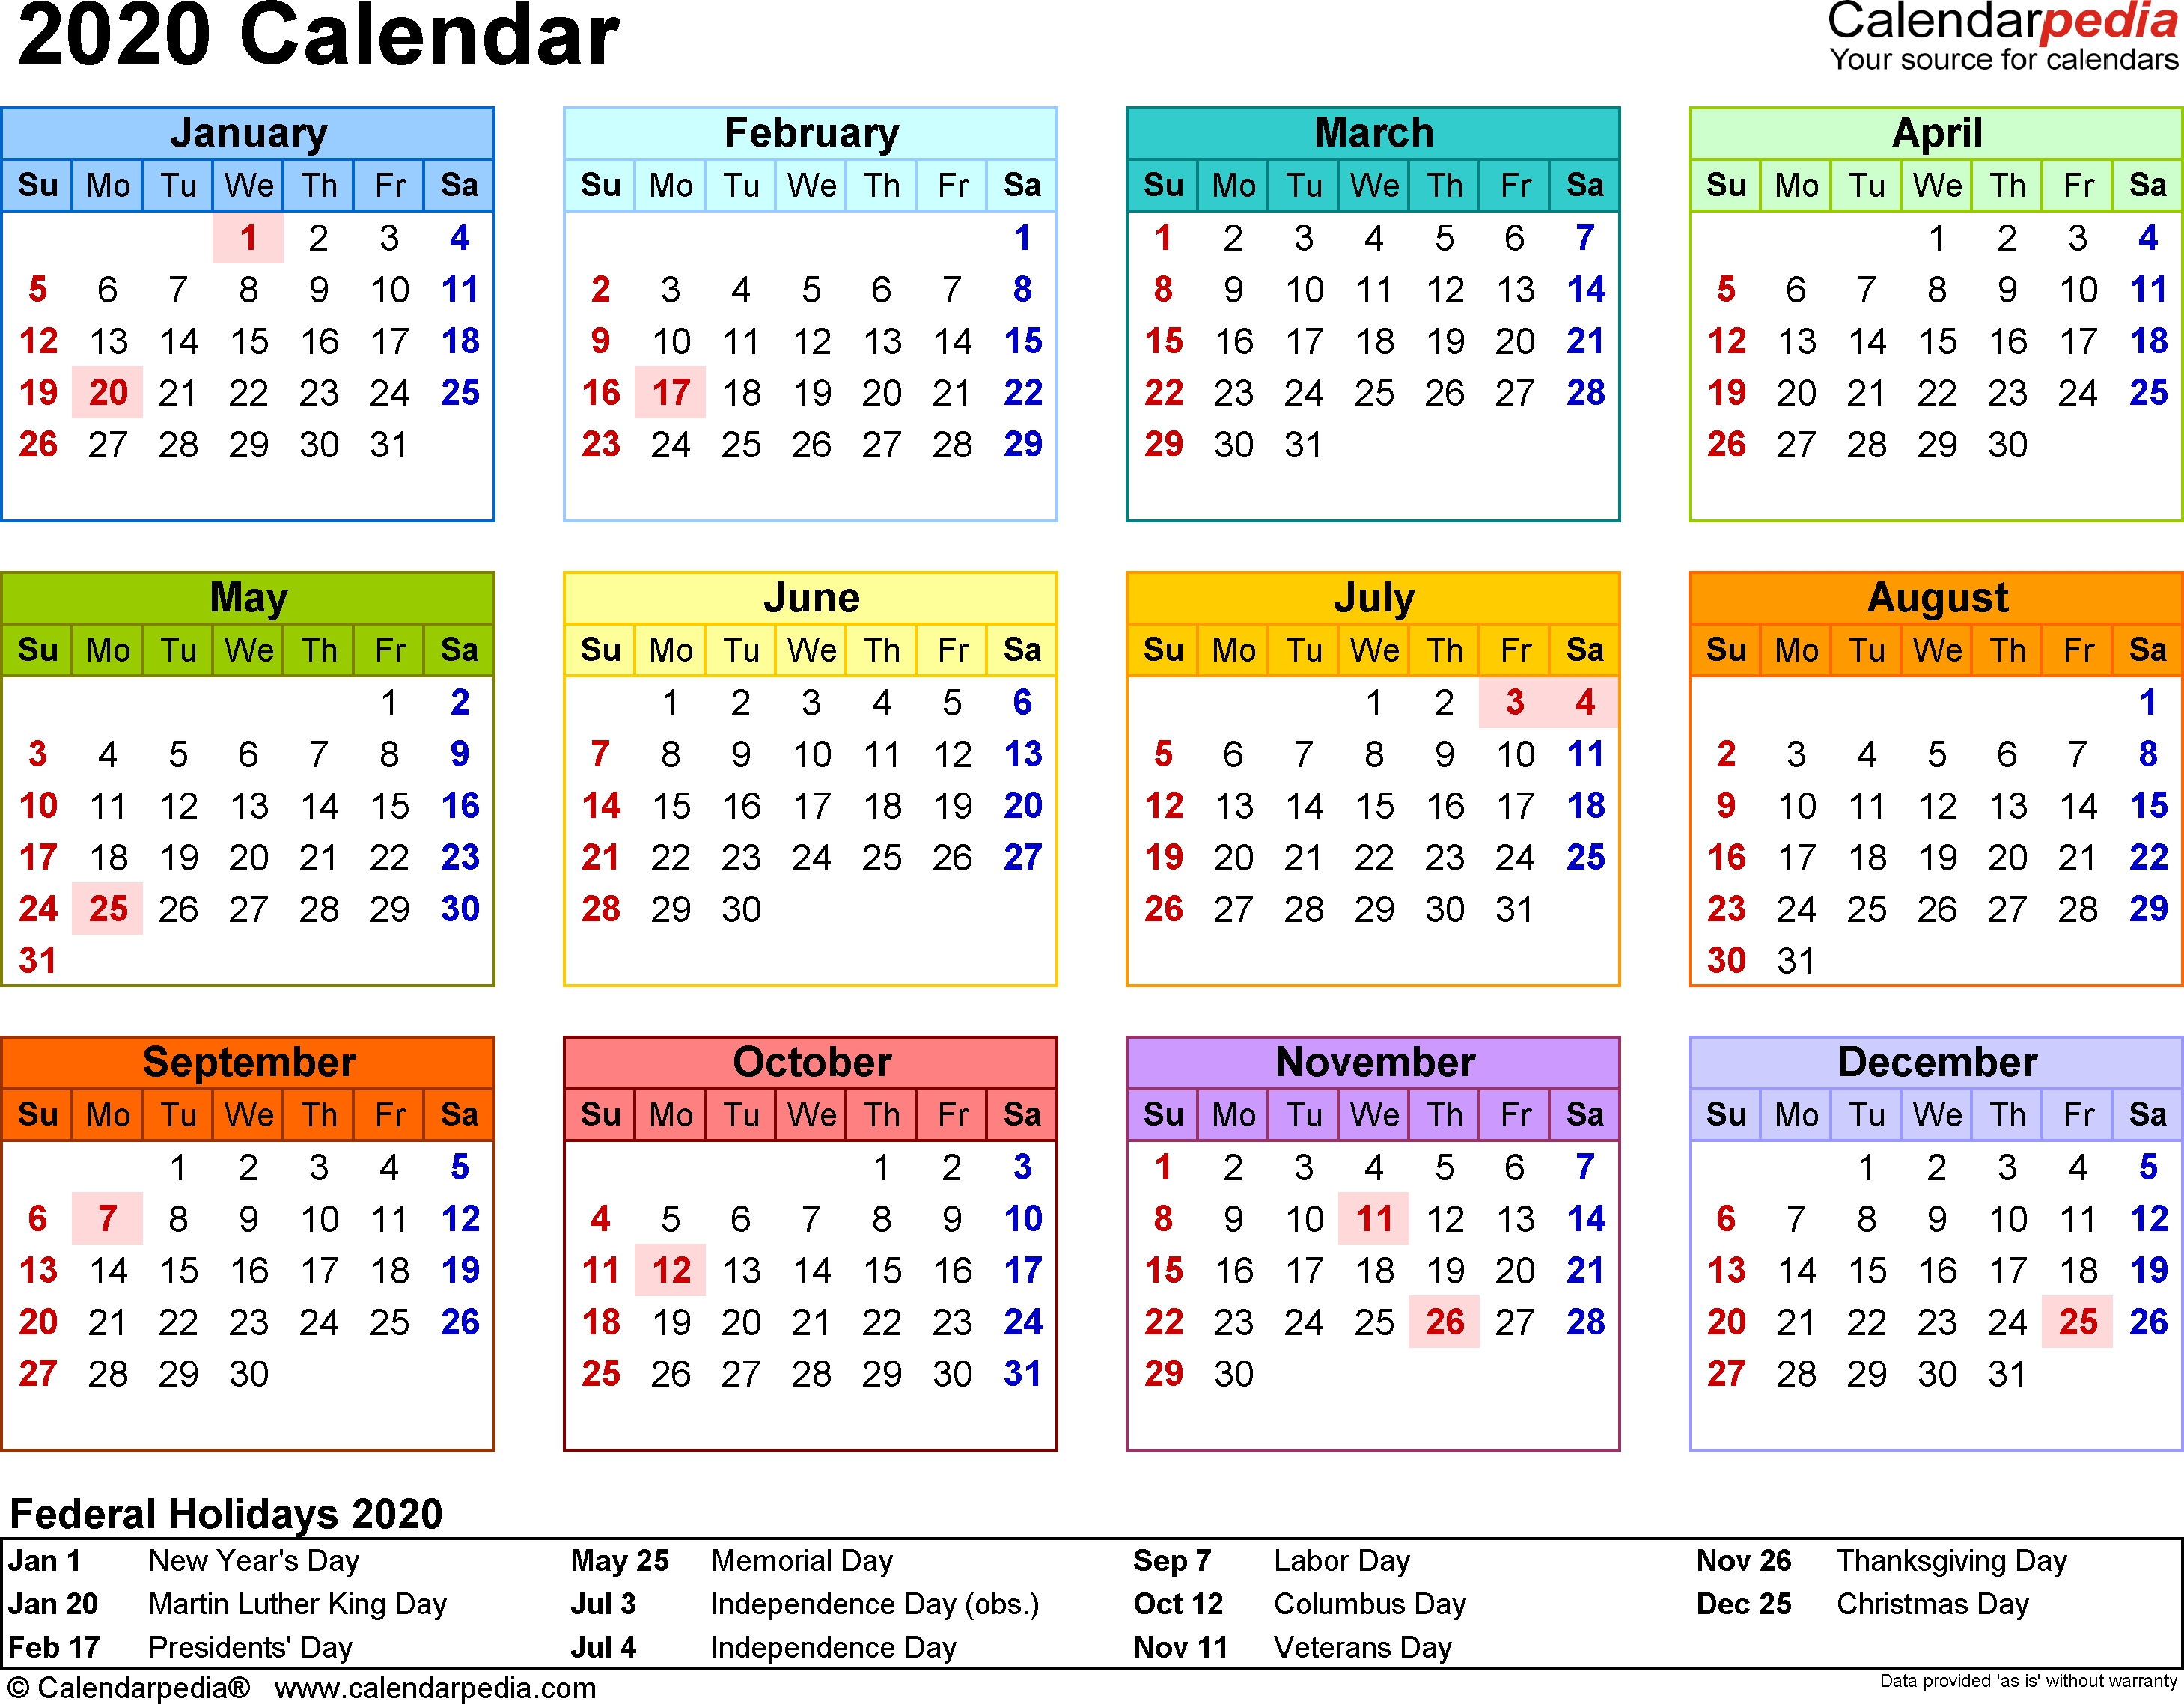 2020 Calendar - Download 18 Free Printable Excel Templates-South Africa Bank Holidays June 2020